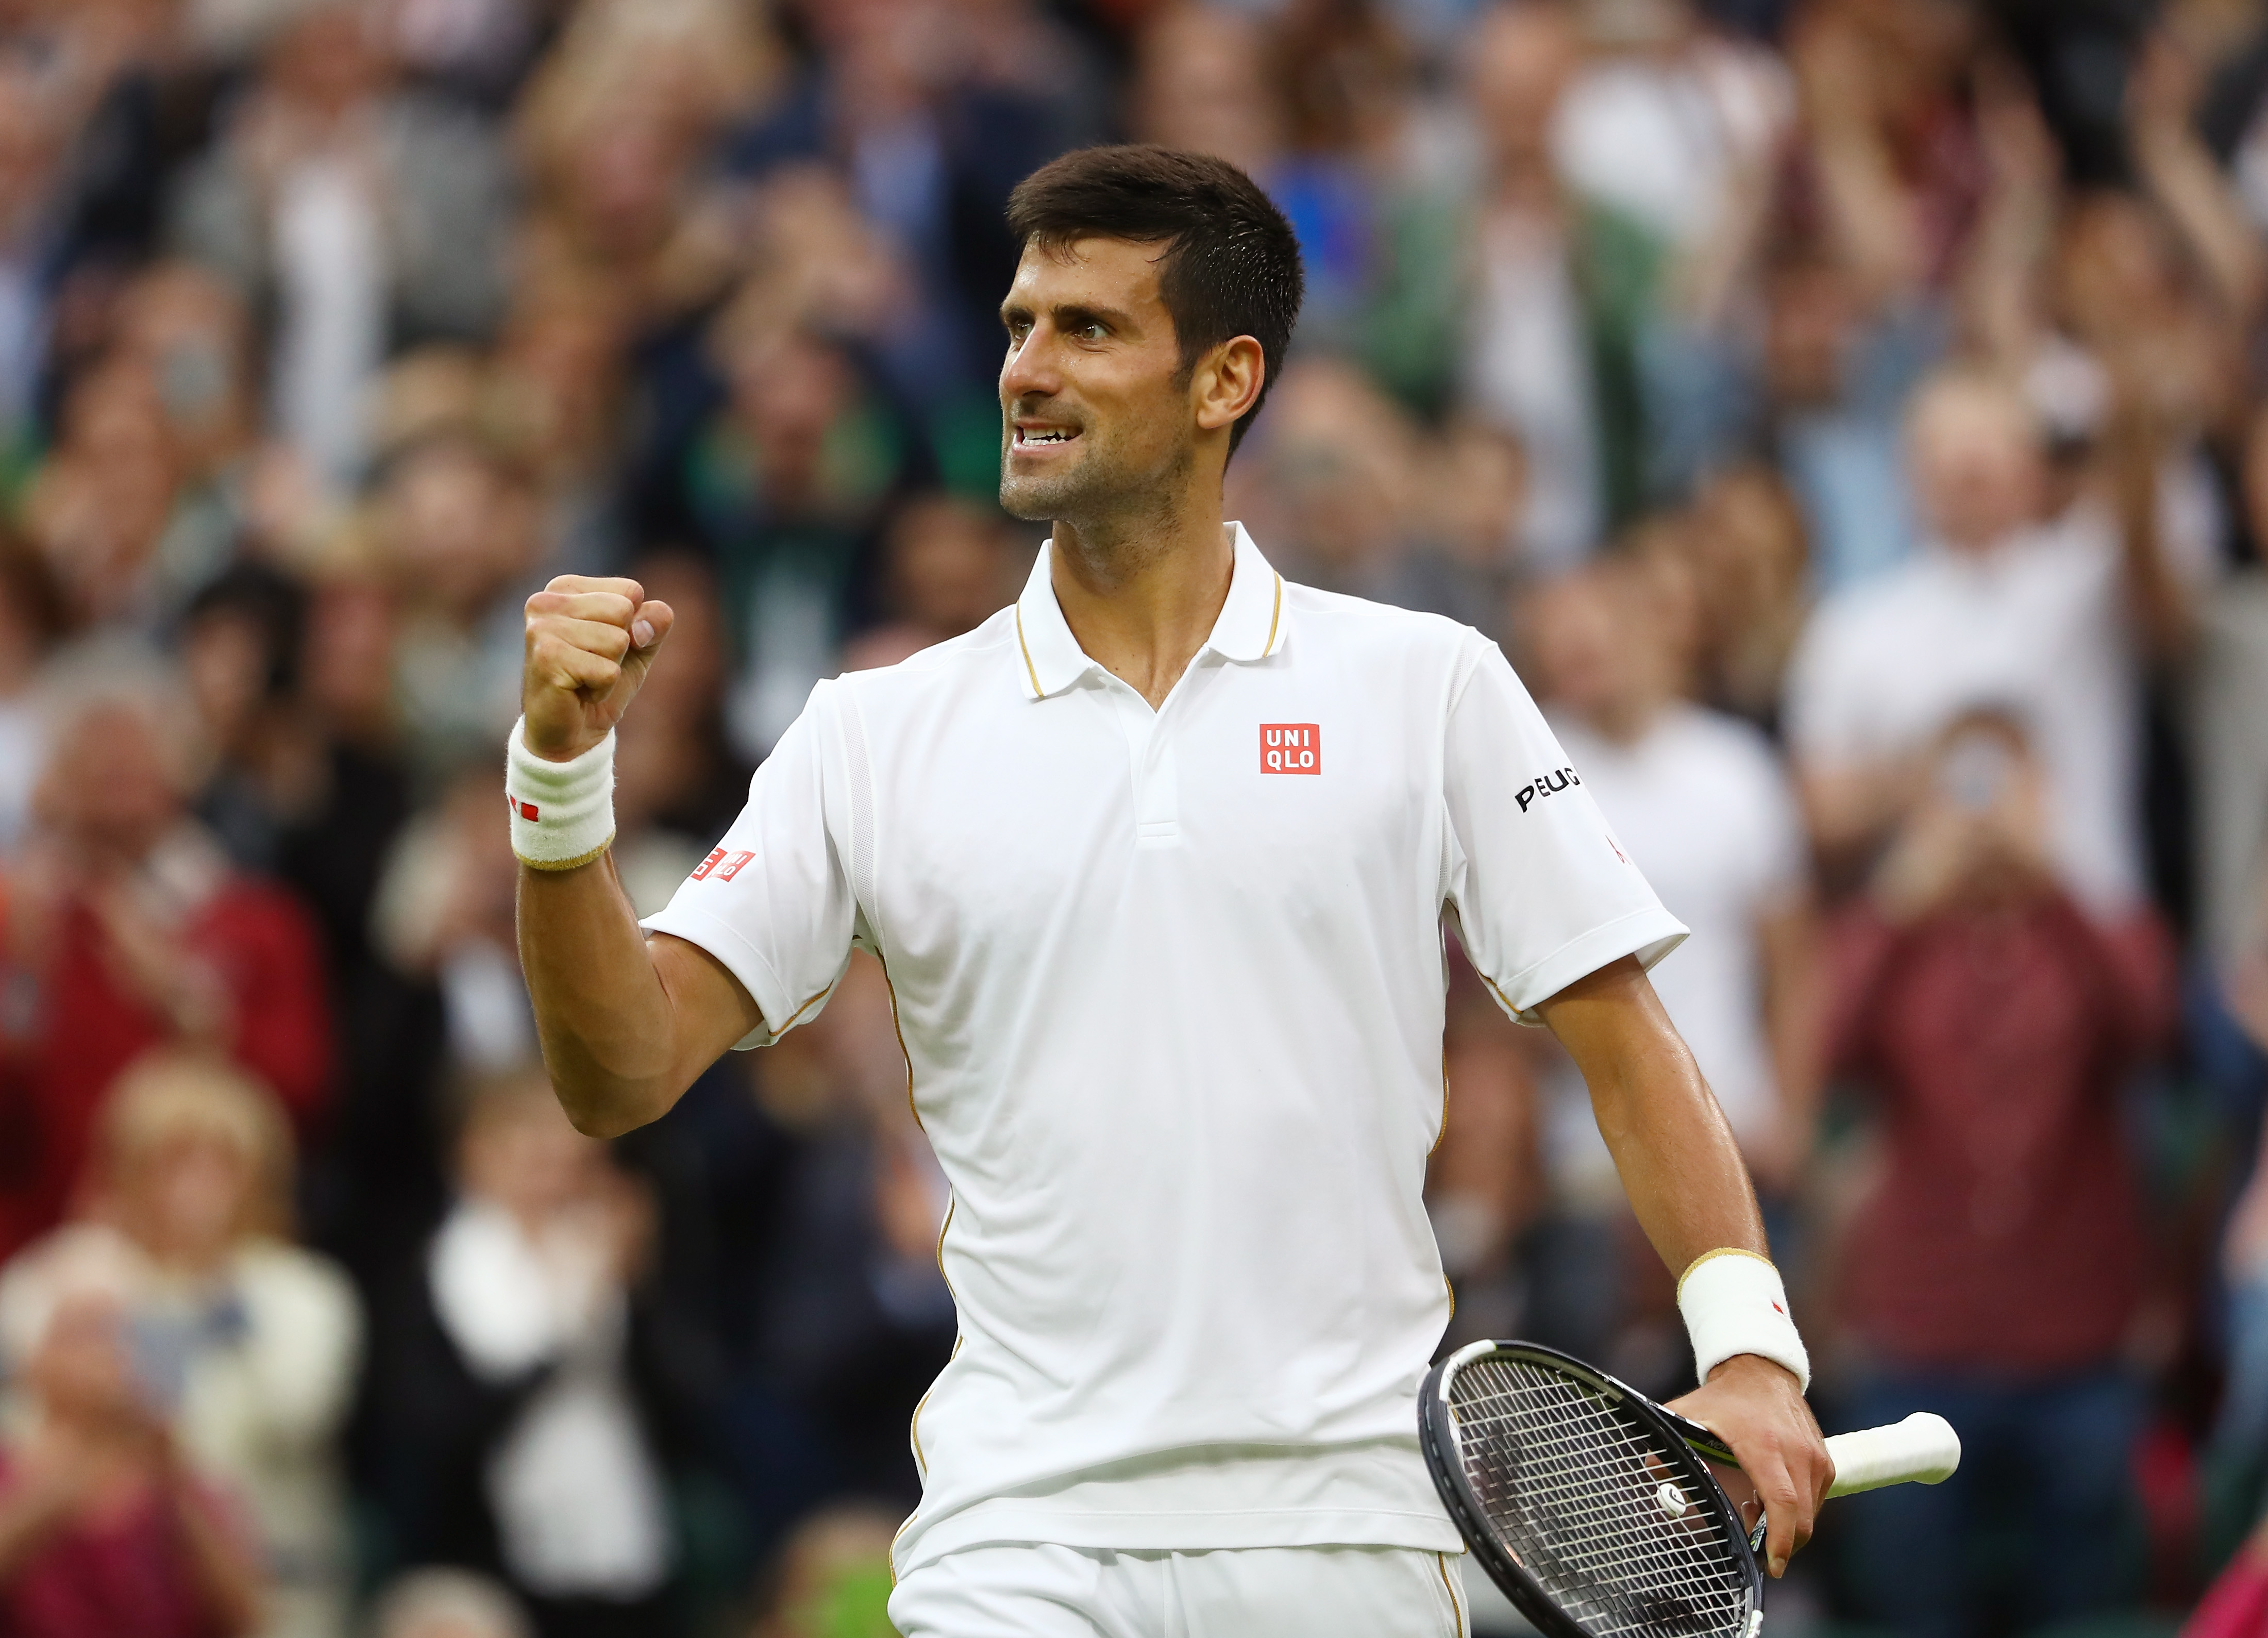 Novak Djokovic feels he is few good matches away from regaining his confidence